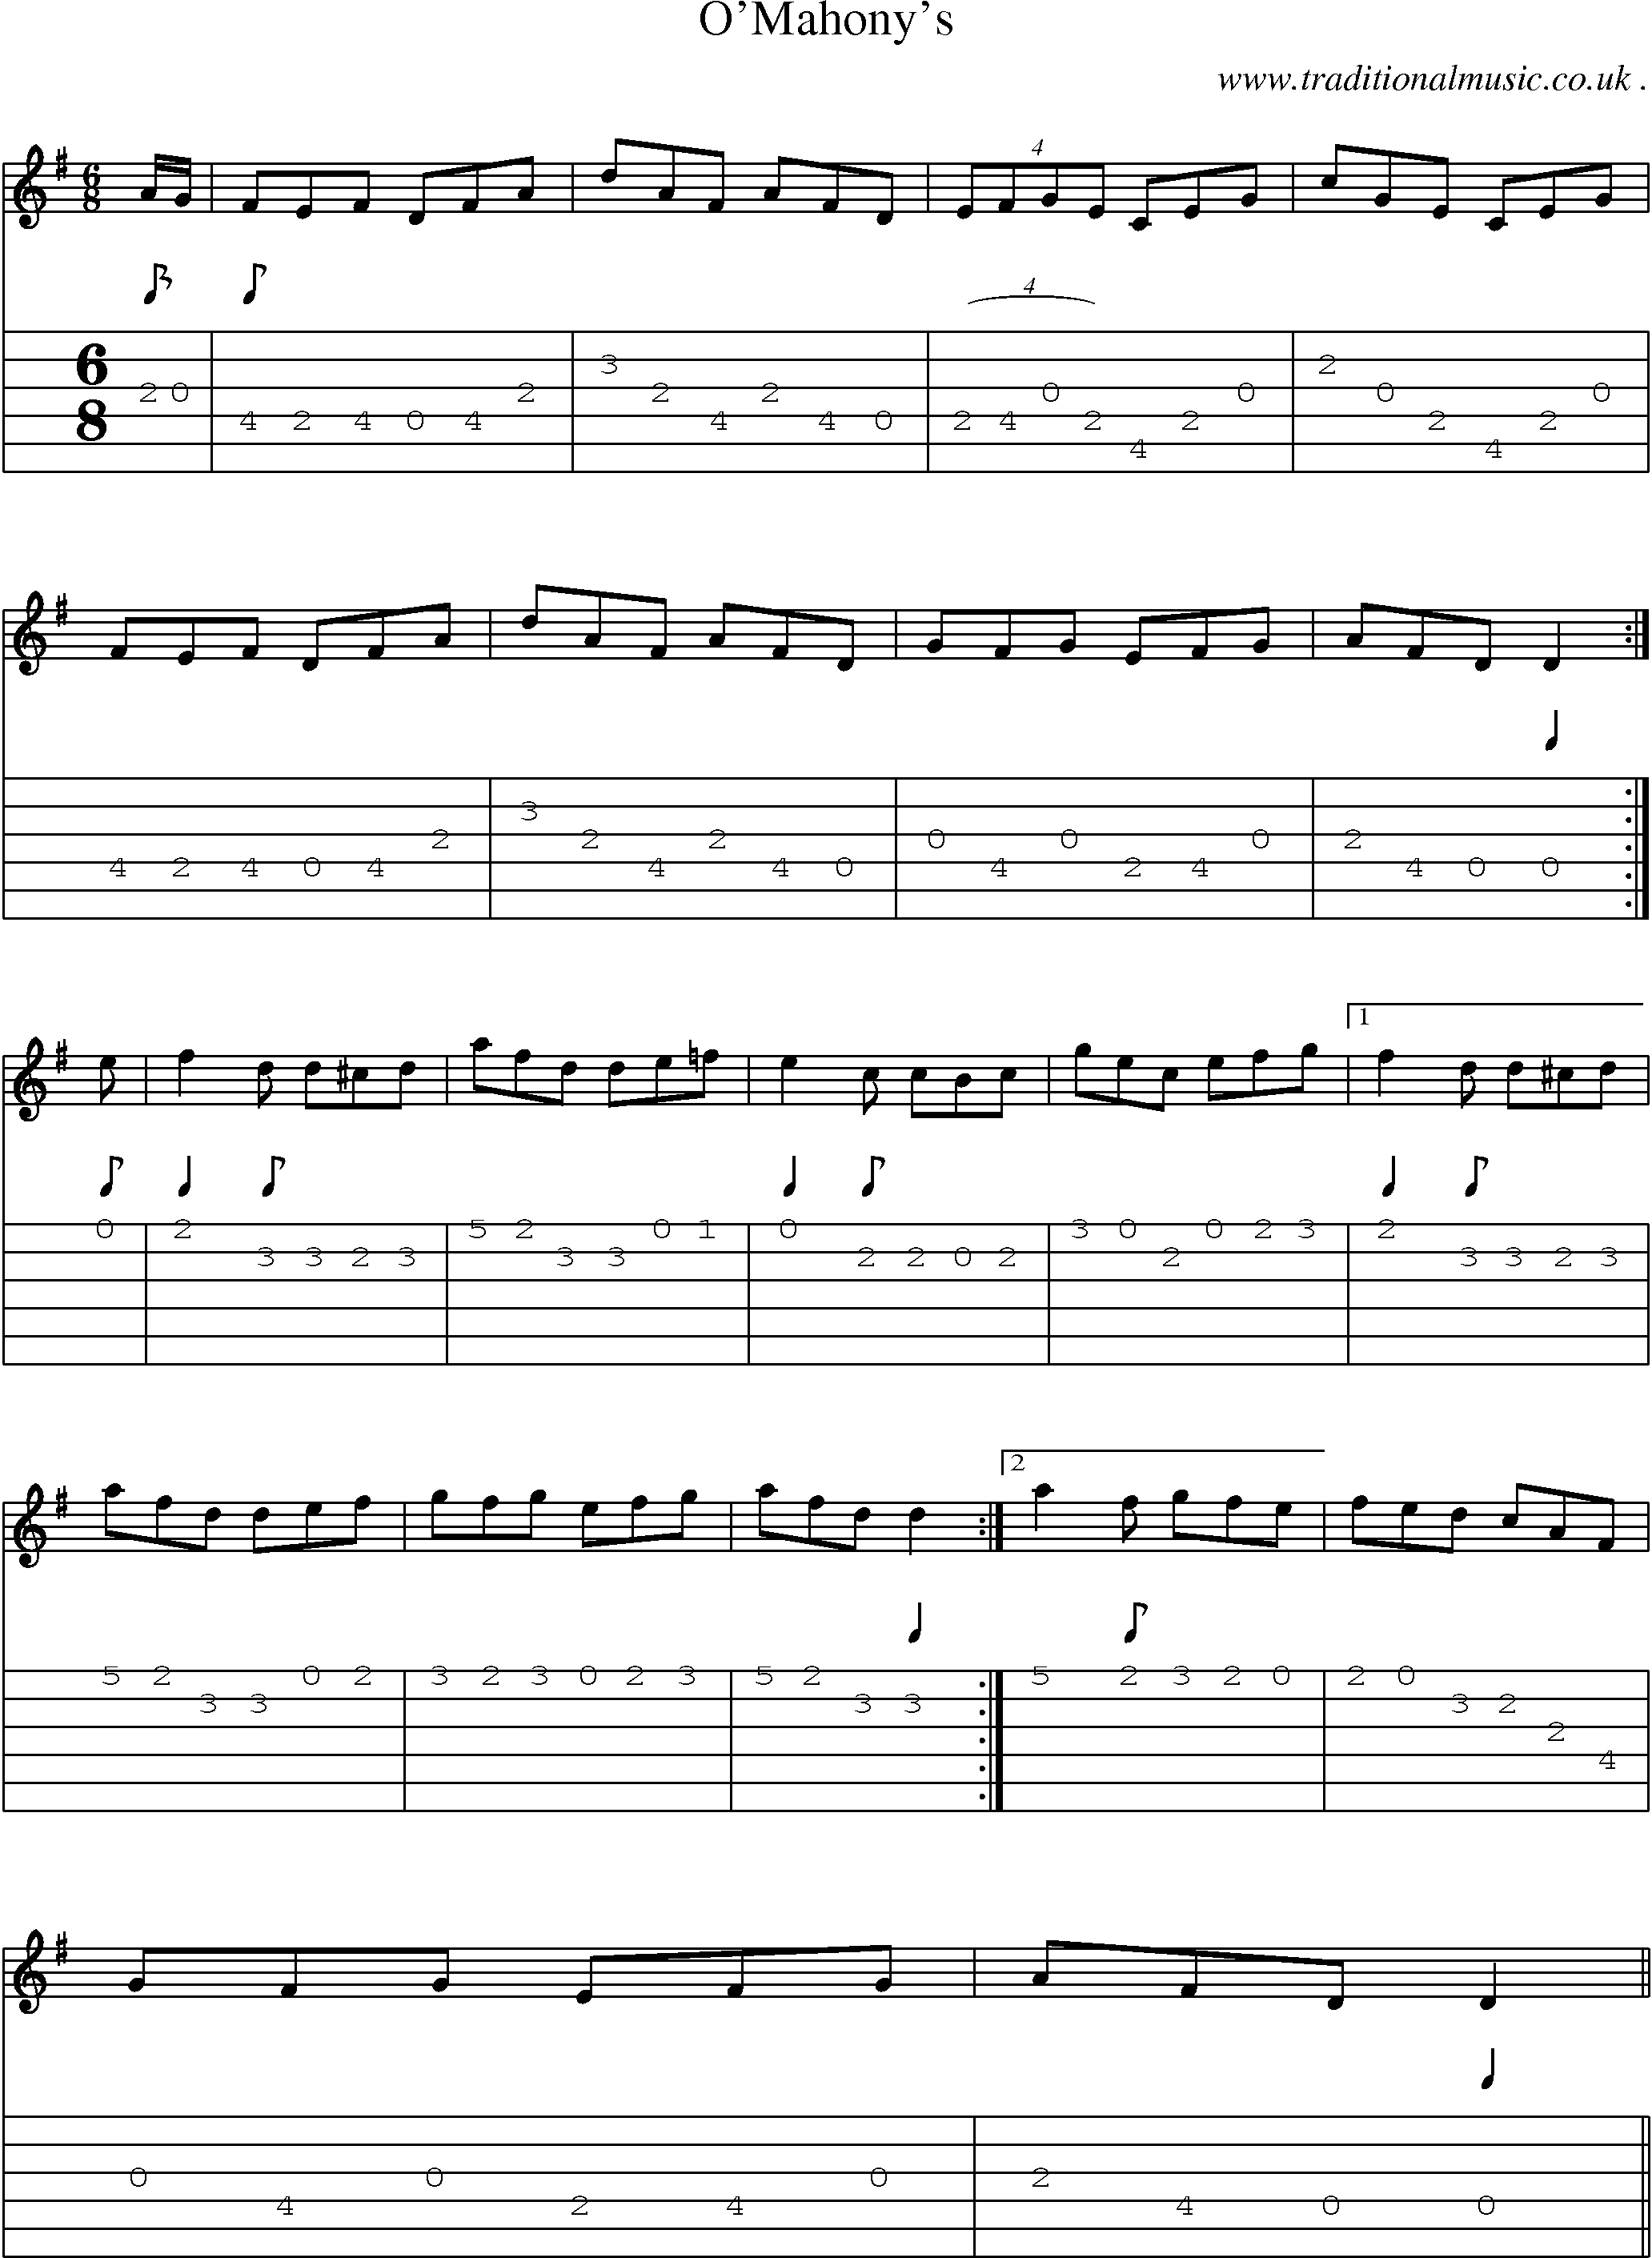 Sheet-Music and Guitar Tabs for Omahonys